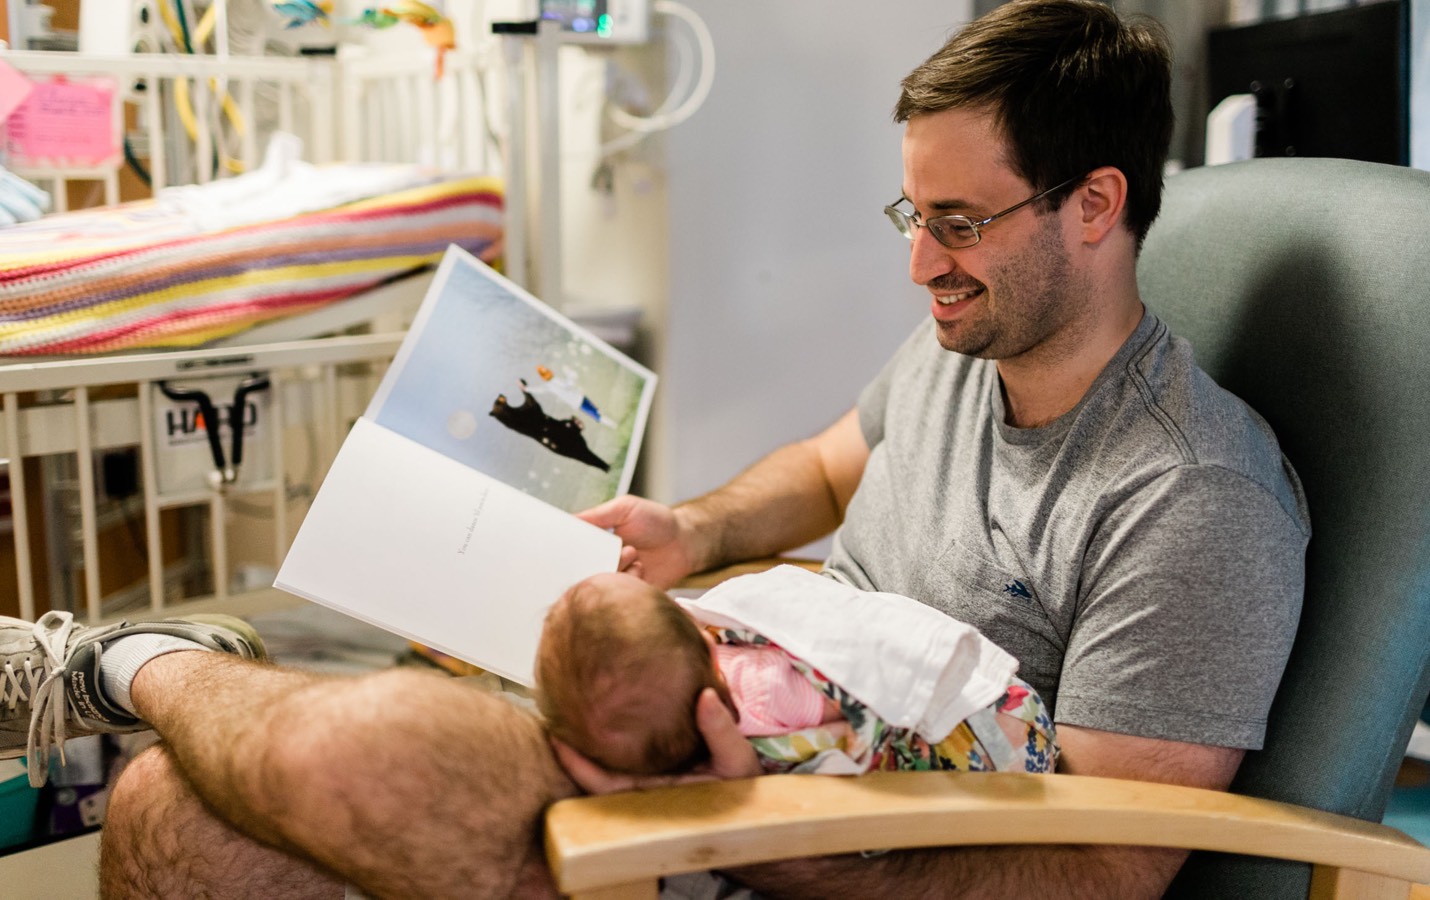 Dad reading to baby